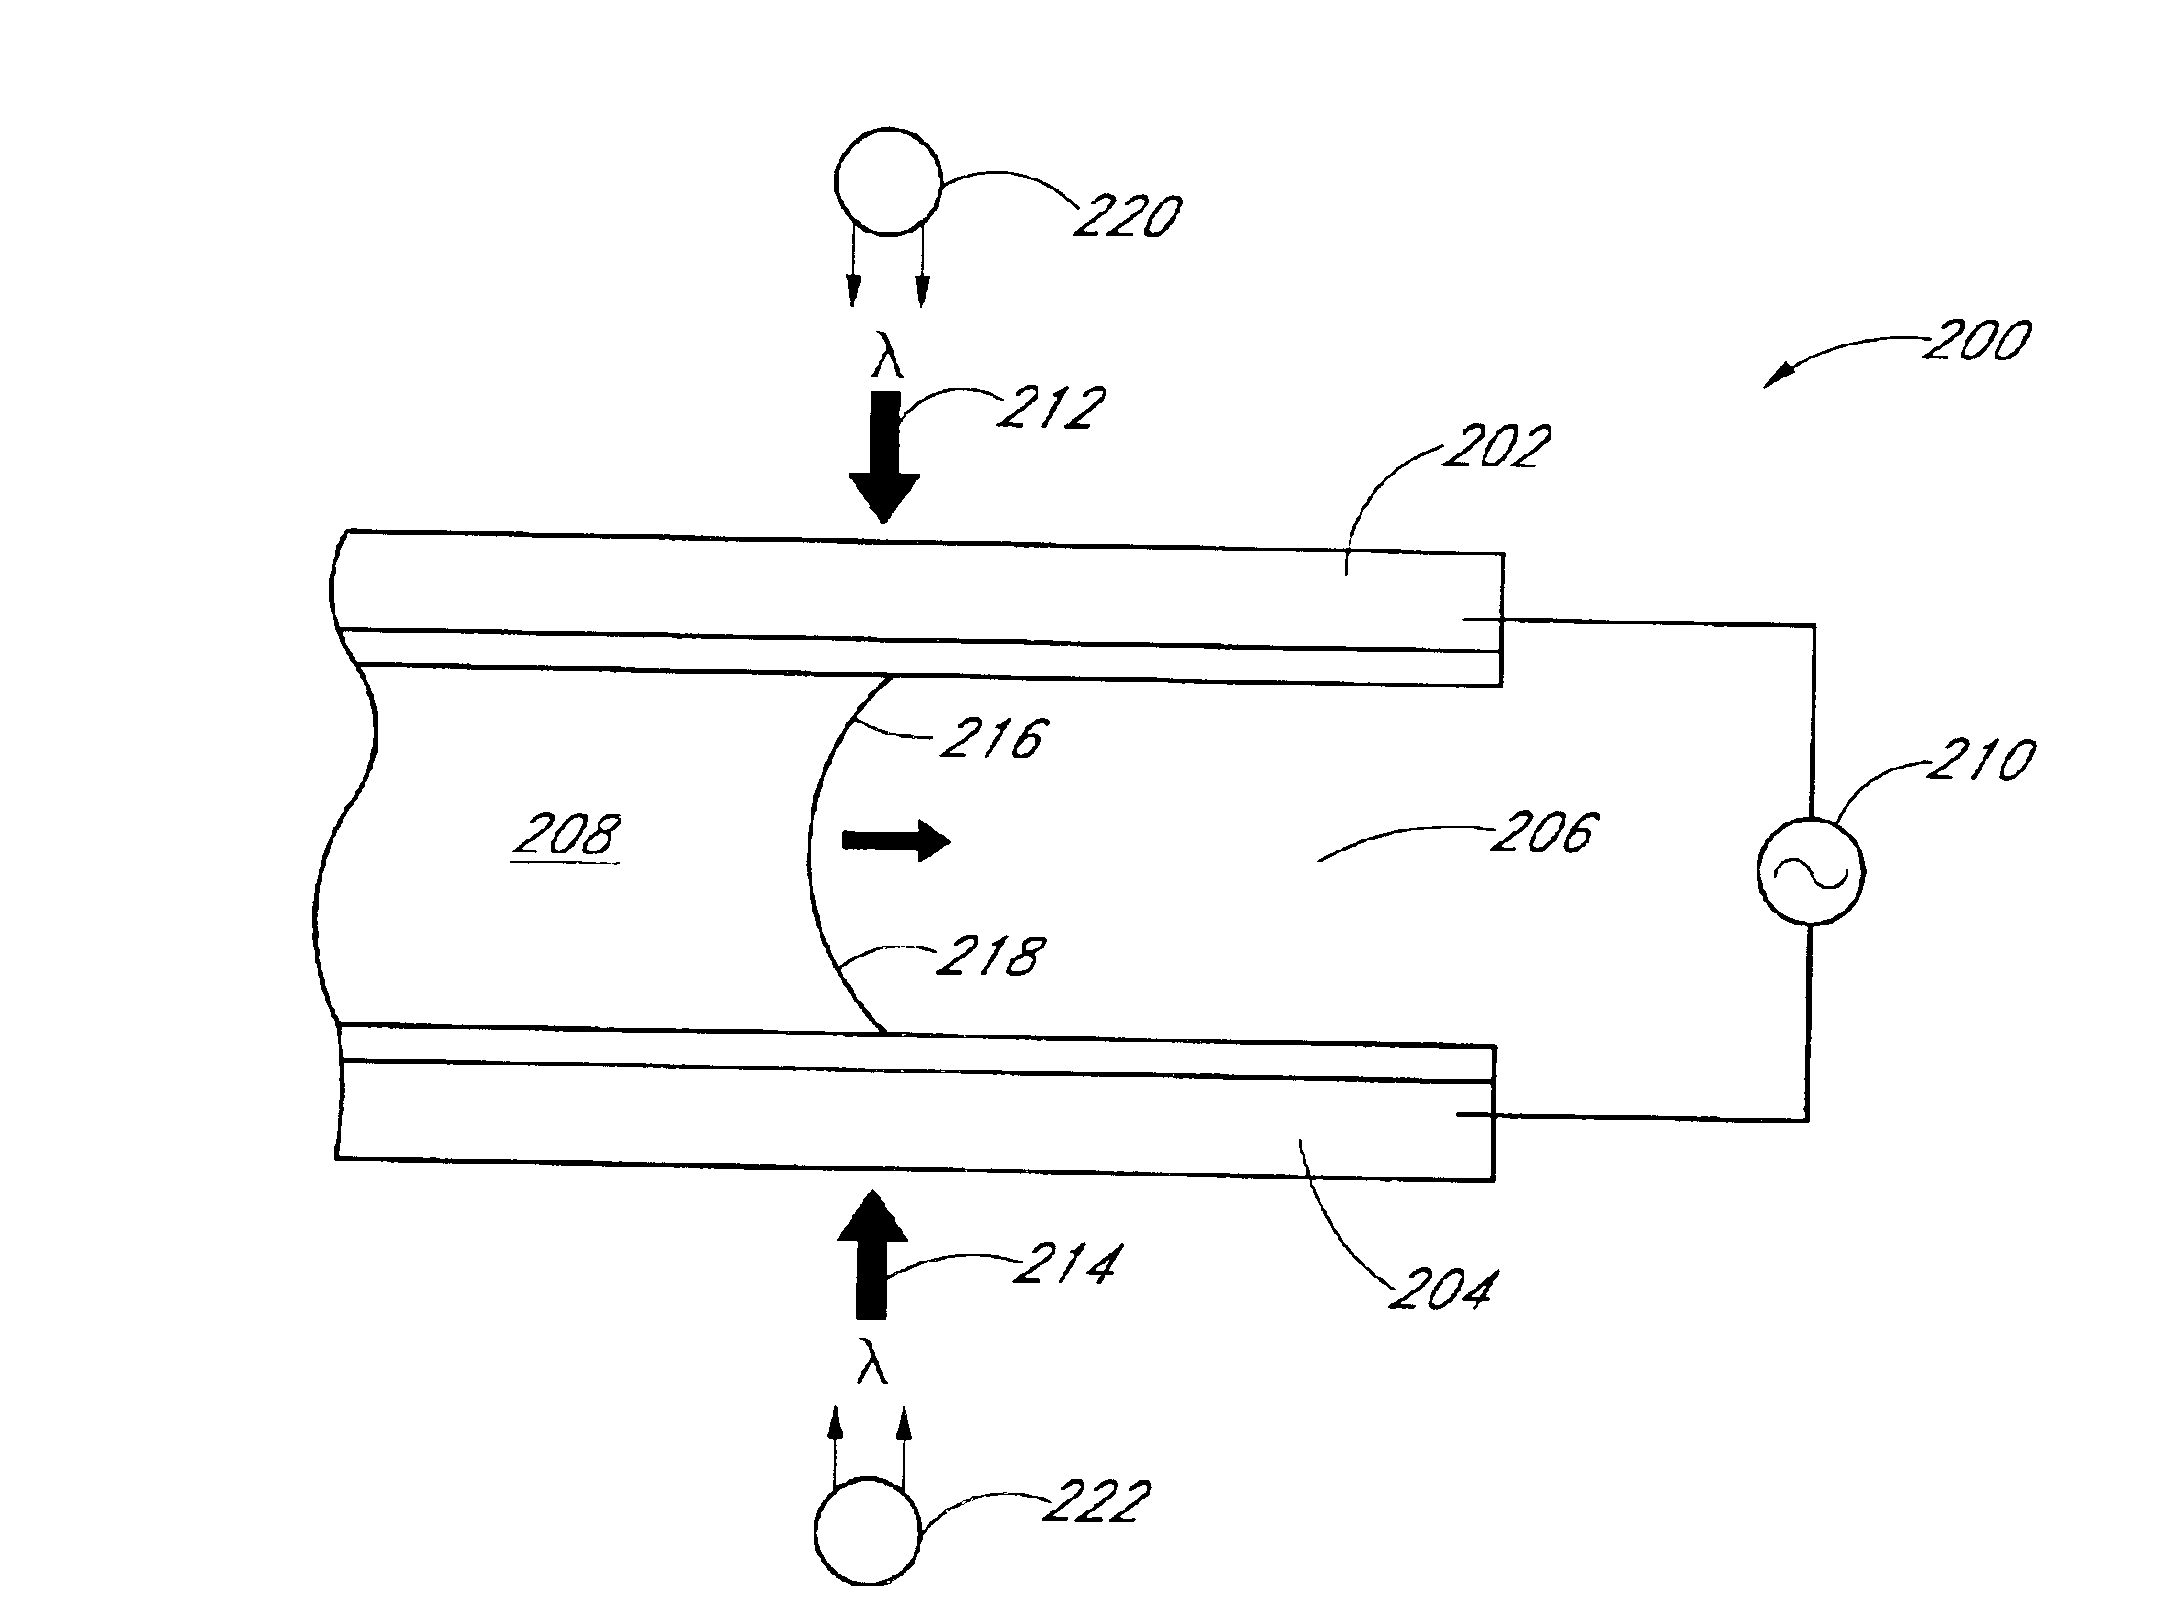 Systems and methods for optical actuation of microfluidics based on opto-electrowetting